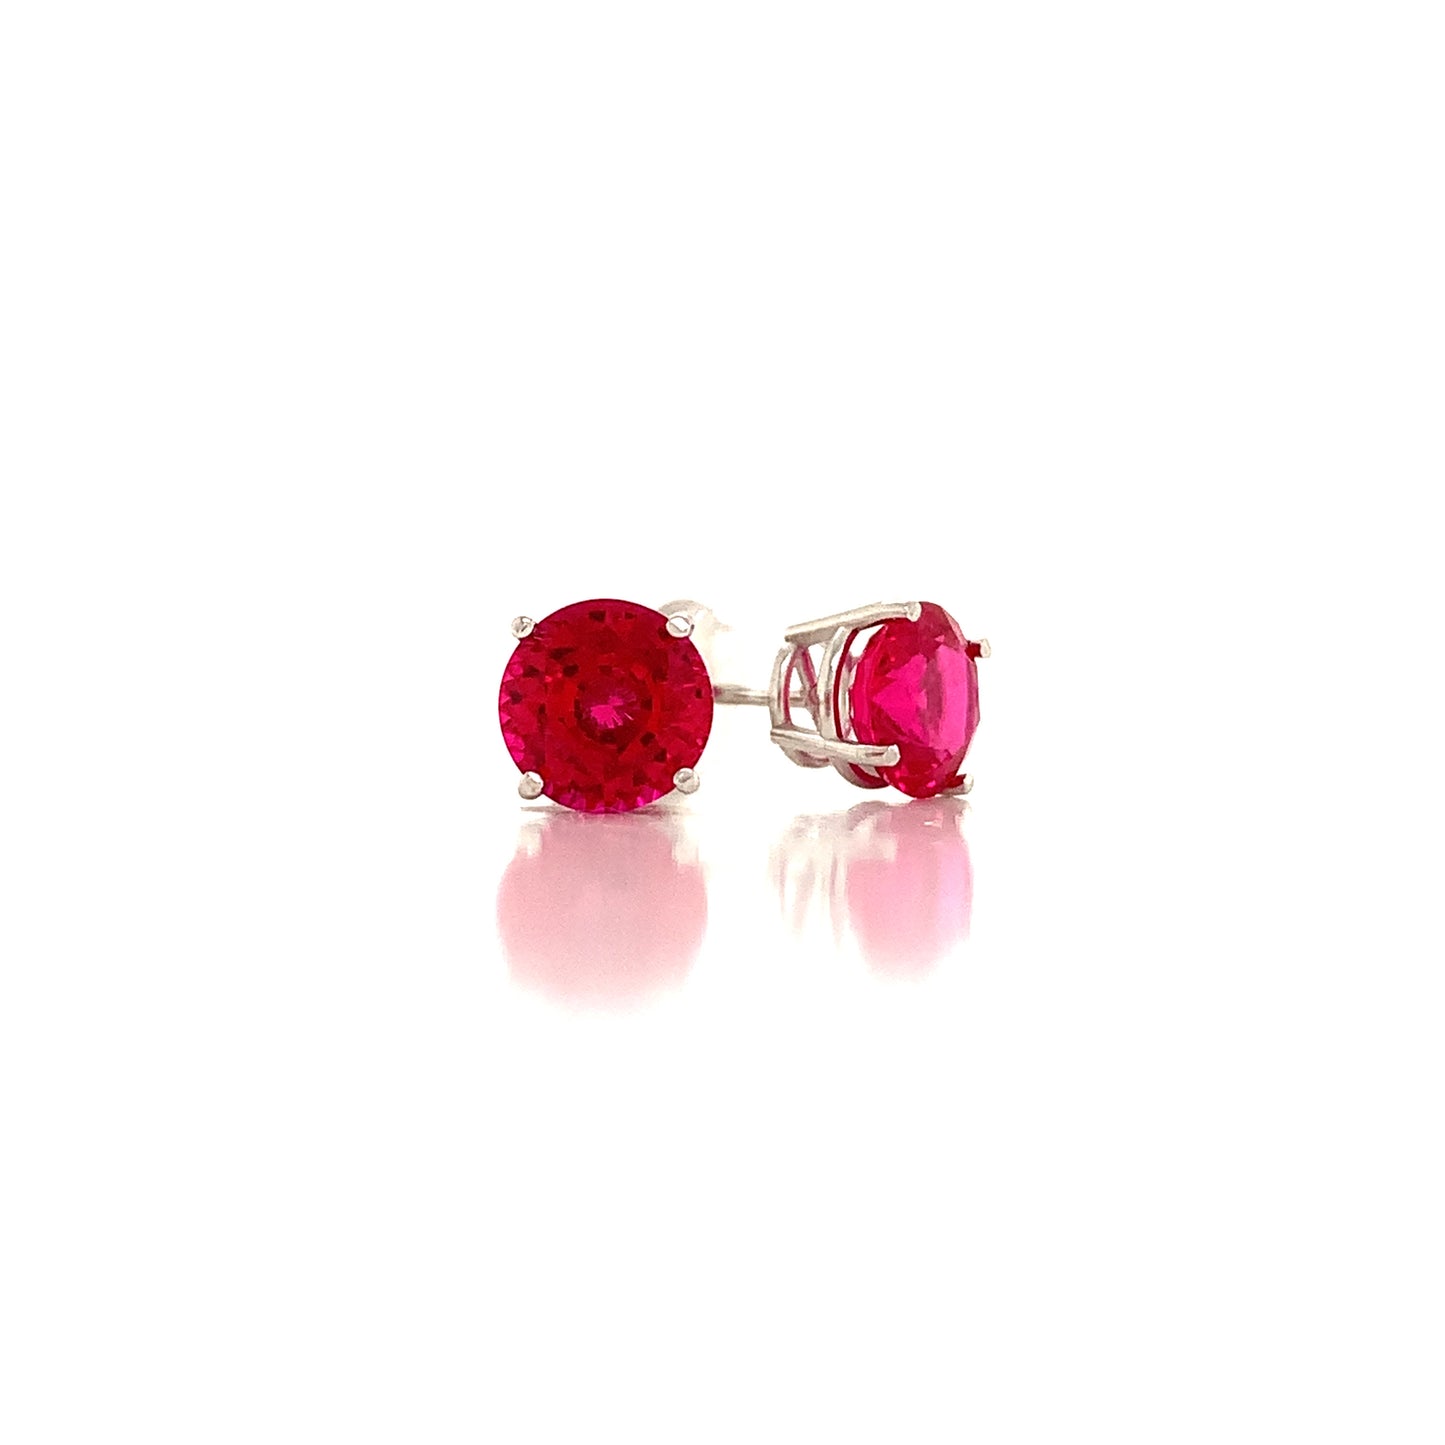 14K White 4 Prong Round Lab Ruby Set in Classic Gold Basket Earring Mountings | Earrings